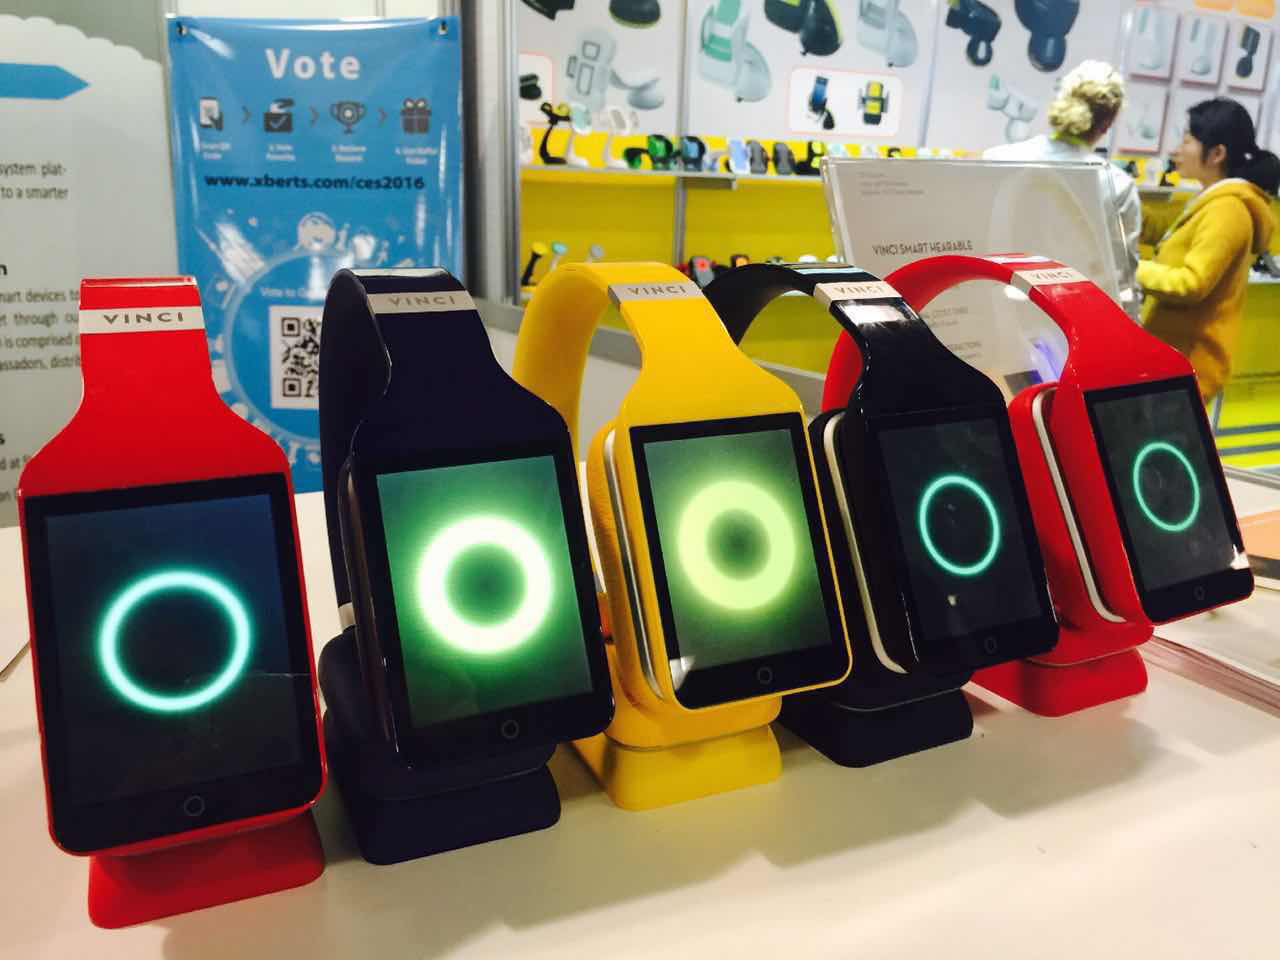 VINCI displayed their products in Punk Red, Rock Black and Folk Yellow in their CES 2016 booth.